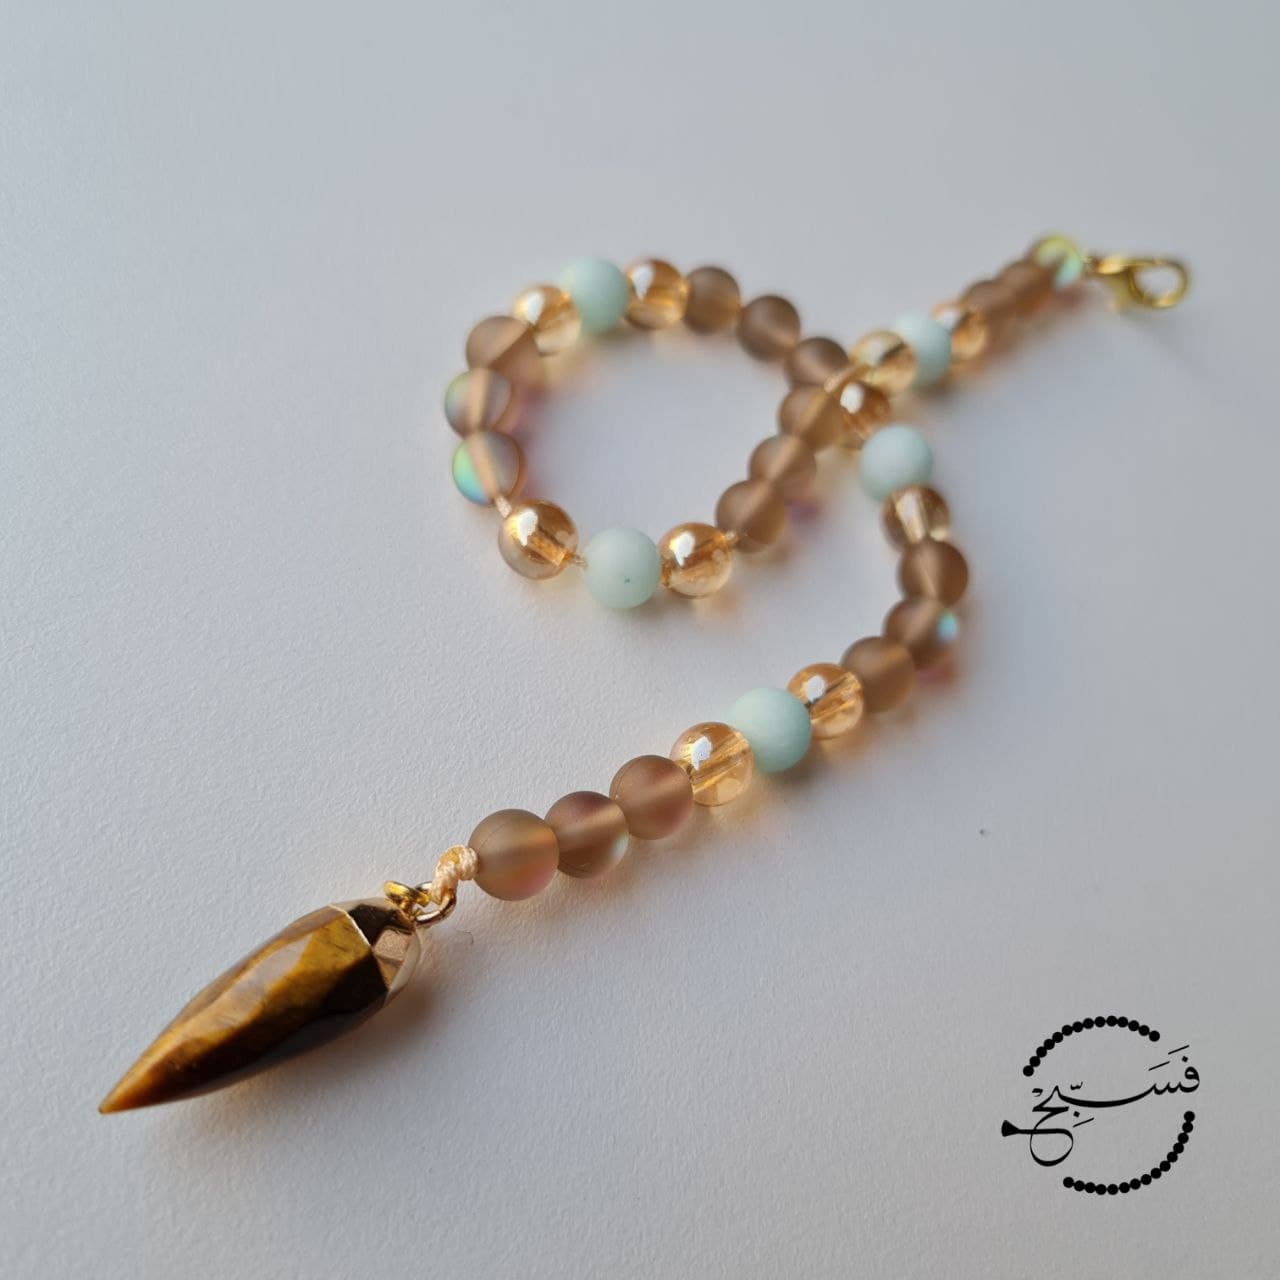 This bag charm features a tiger eye pendant with coffee coloured moonstone and amazonite beads.   33 bead tasbih that can be attached to your bag.   Packaged in a luxurious pouch and a gift box.